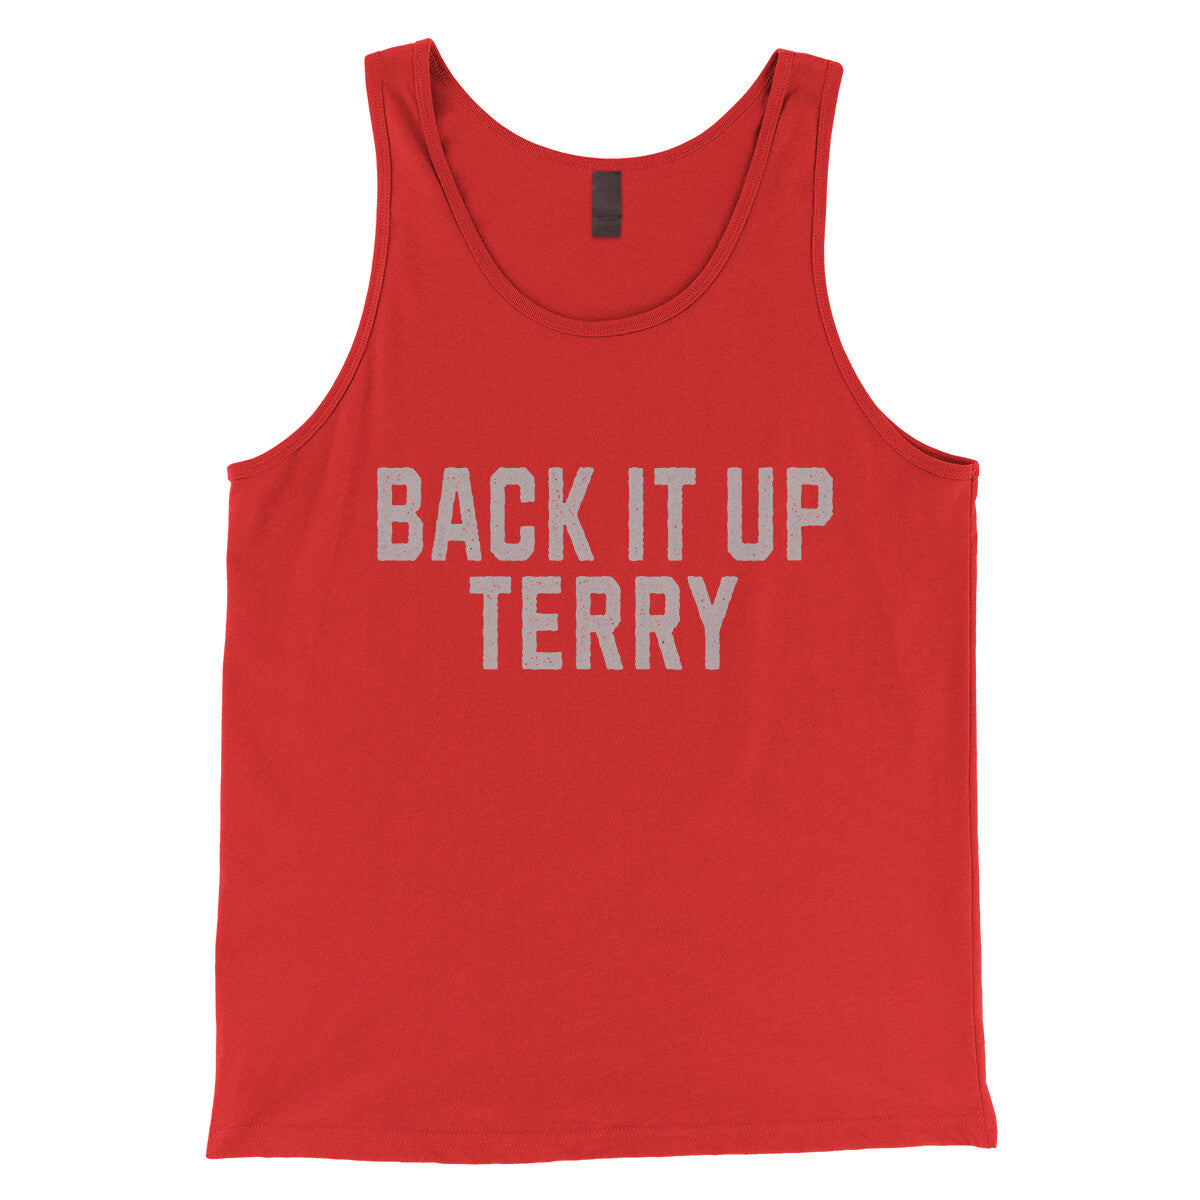 Back it up Terry in Red Color